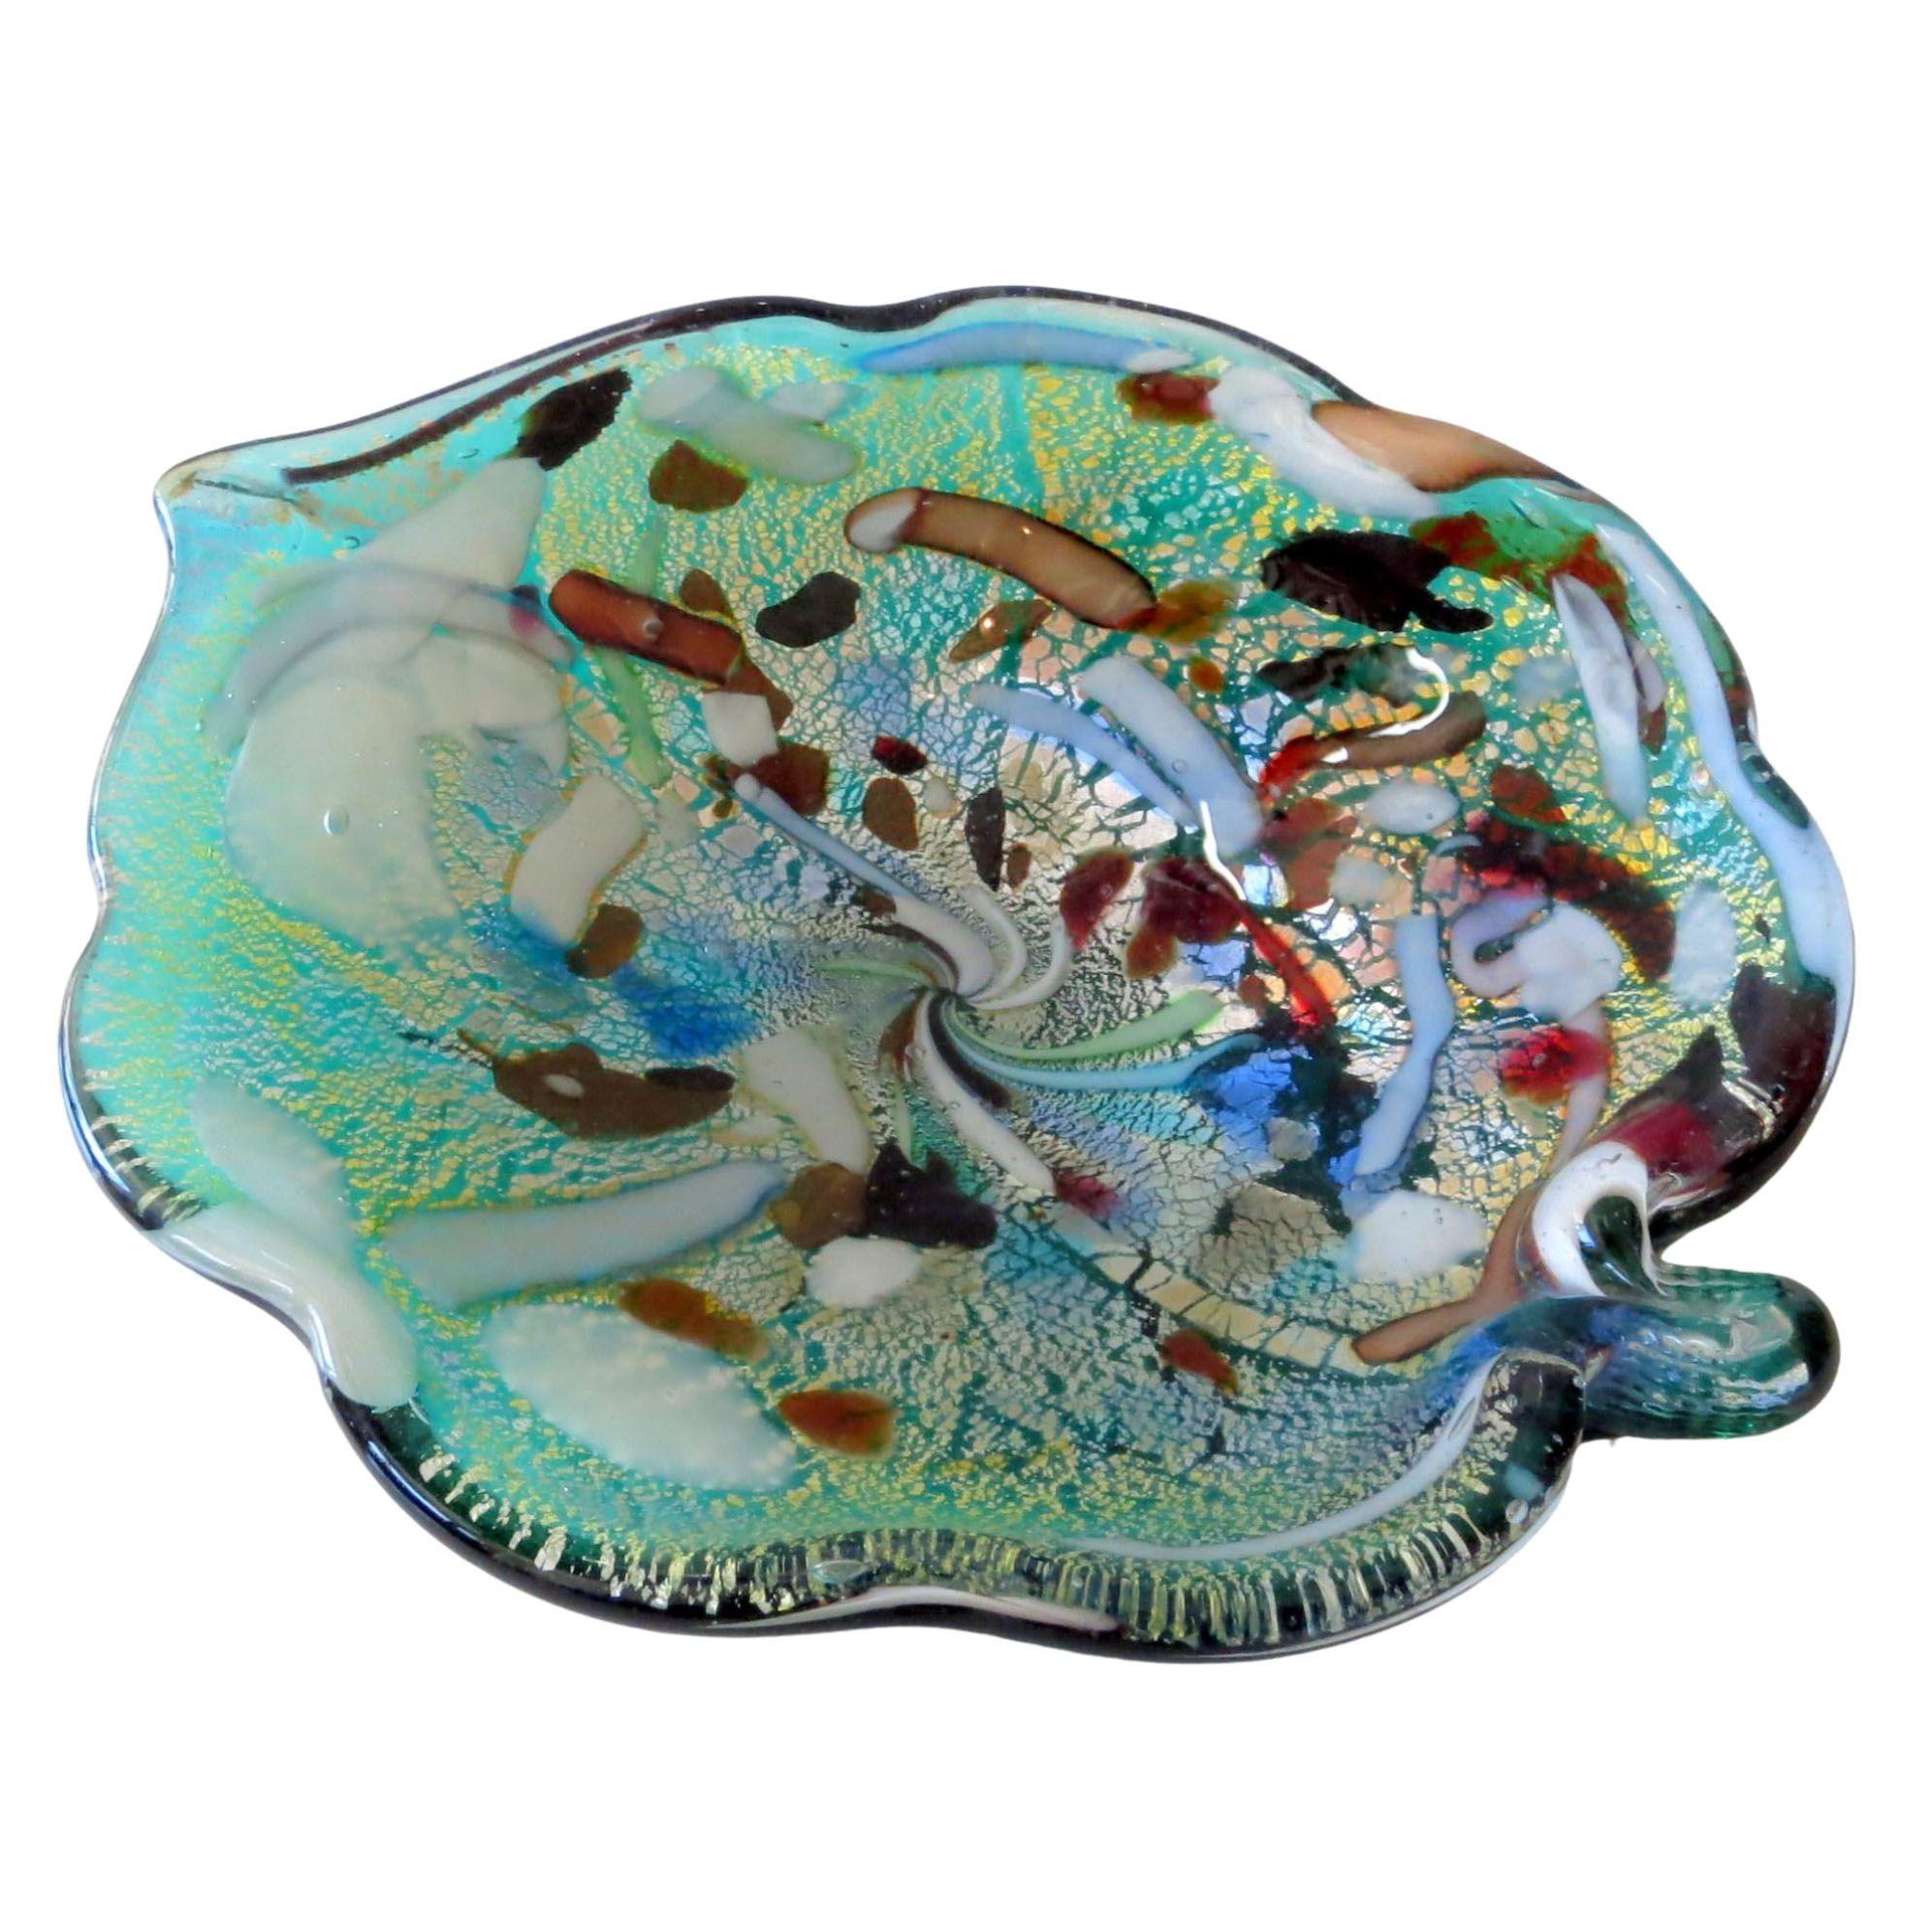 This vintage candy dish is made of teal 'sommerso' art glass with a clear casing, and decorated with various bits of different colored and textured glass. The glass 'confetti' is suspended within the casing above a layer of silver foil, and does not